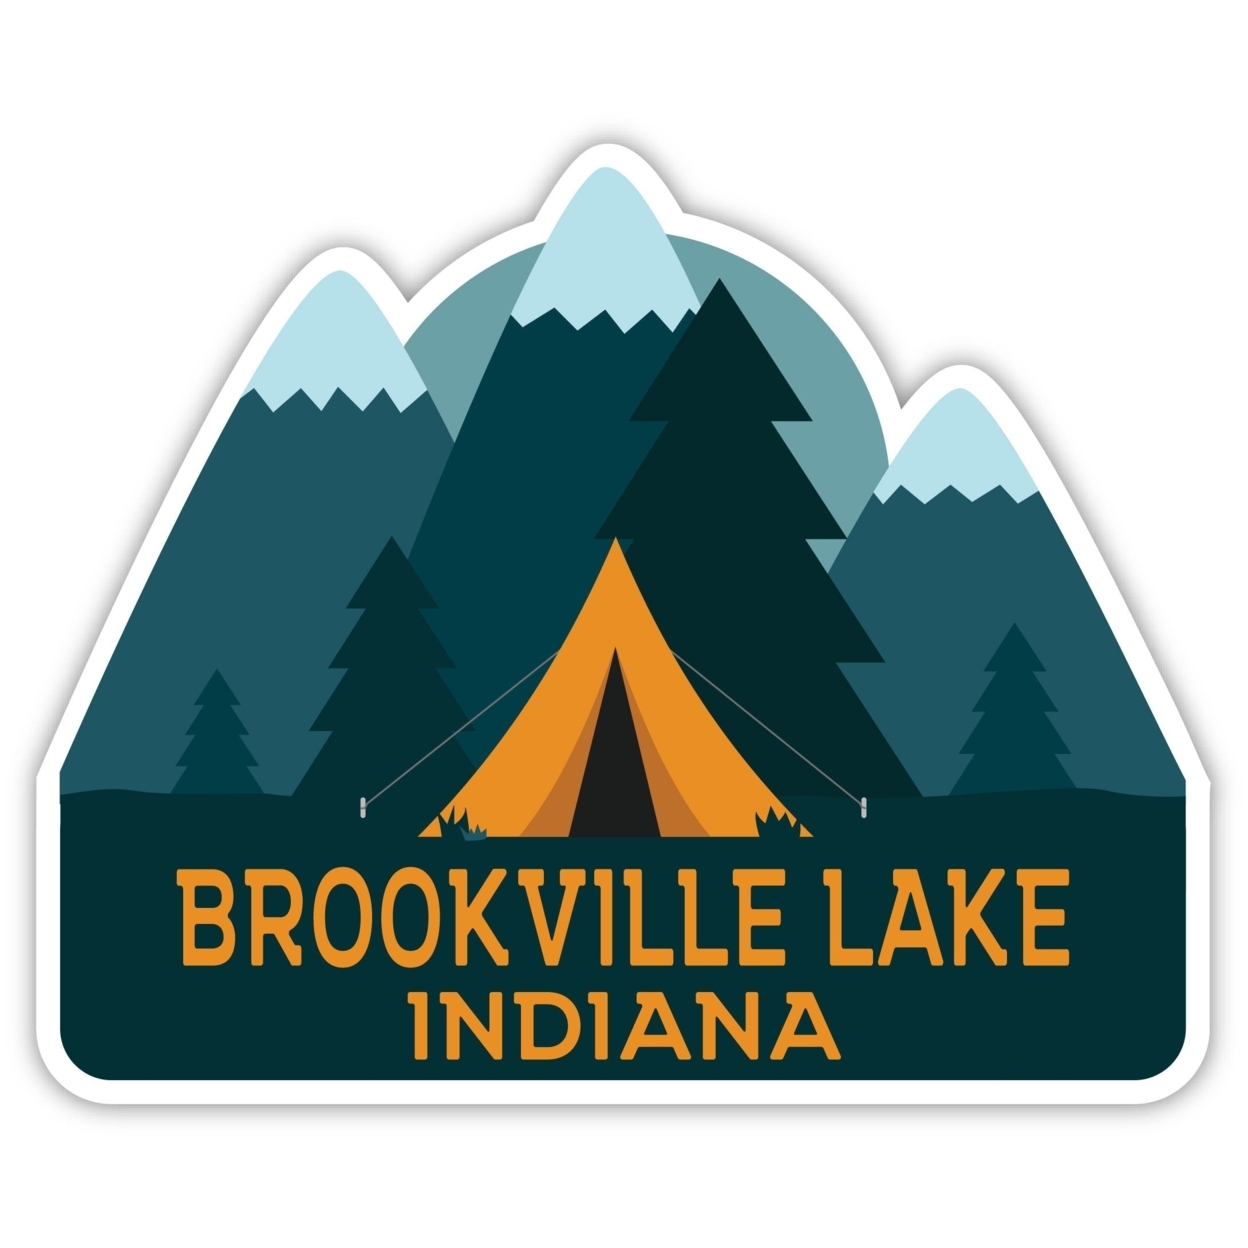 Brookville Lake Indiana Souvenir Decorative Stickers (Choose Theme And Size) - 4-Pack, 10-Inch, Tent